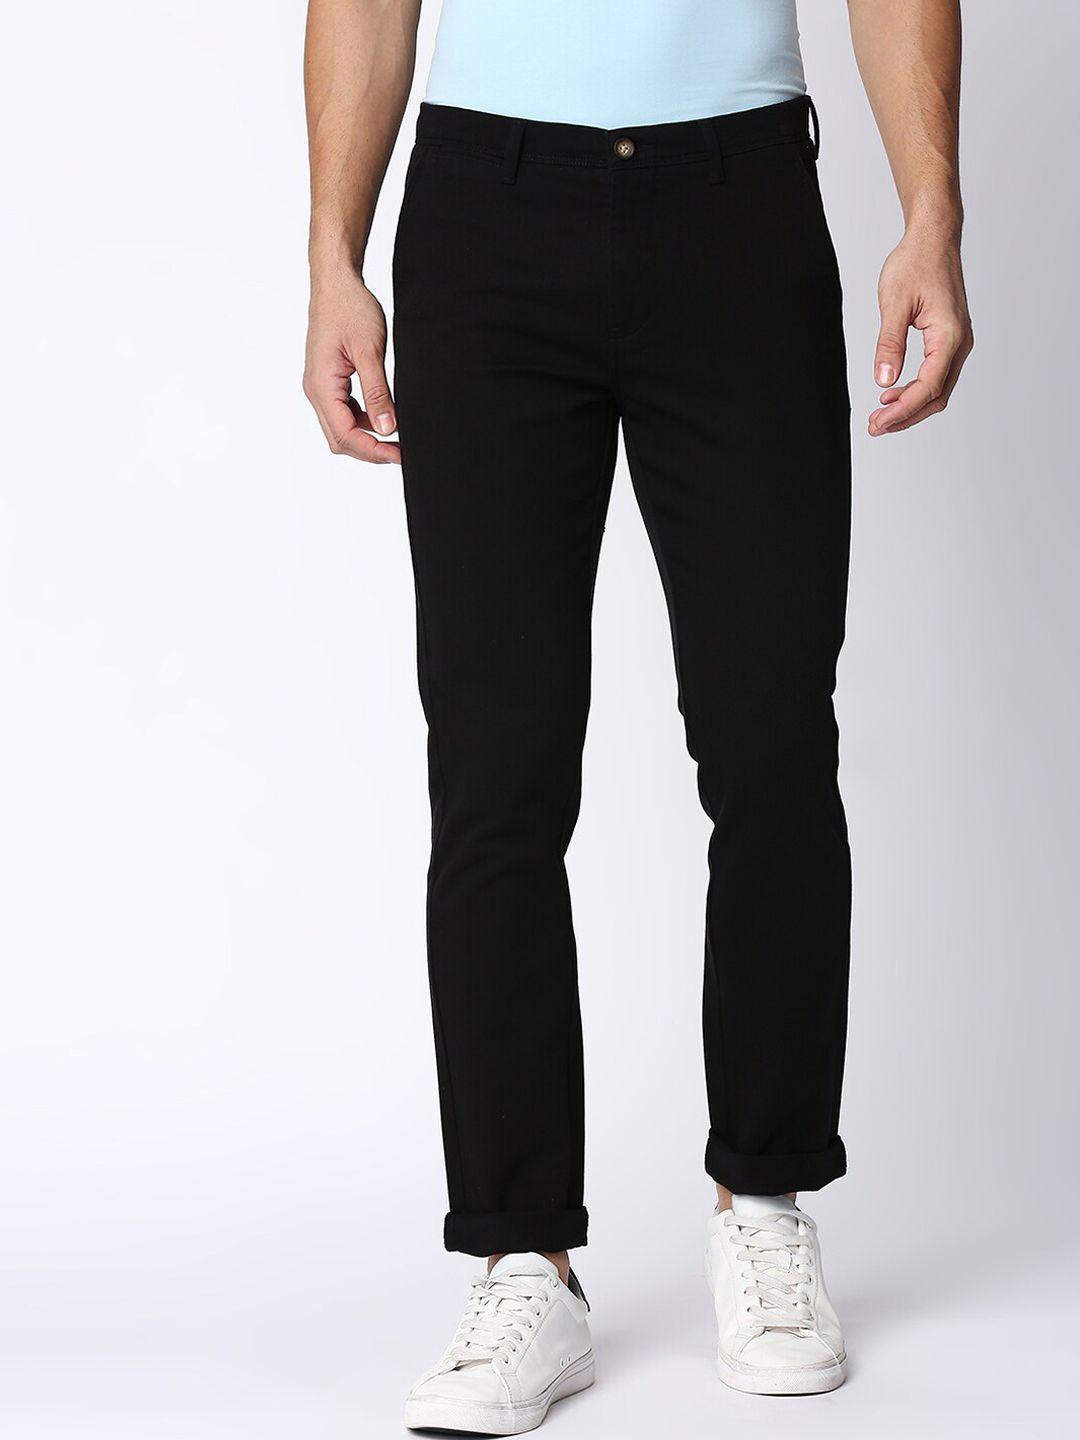 dragon-hill-men-mid-rise-slim-fit-cotton-chinos-trousers